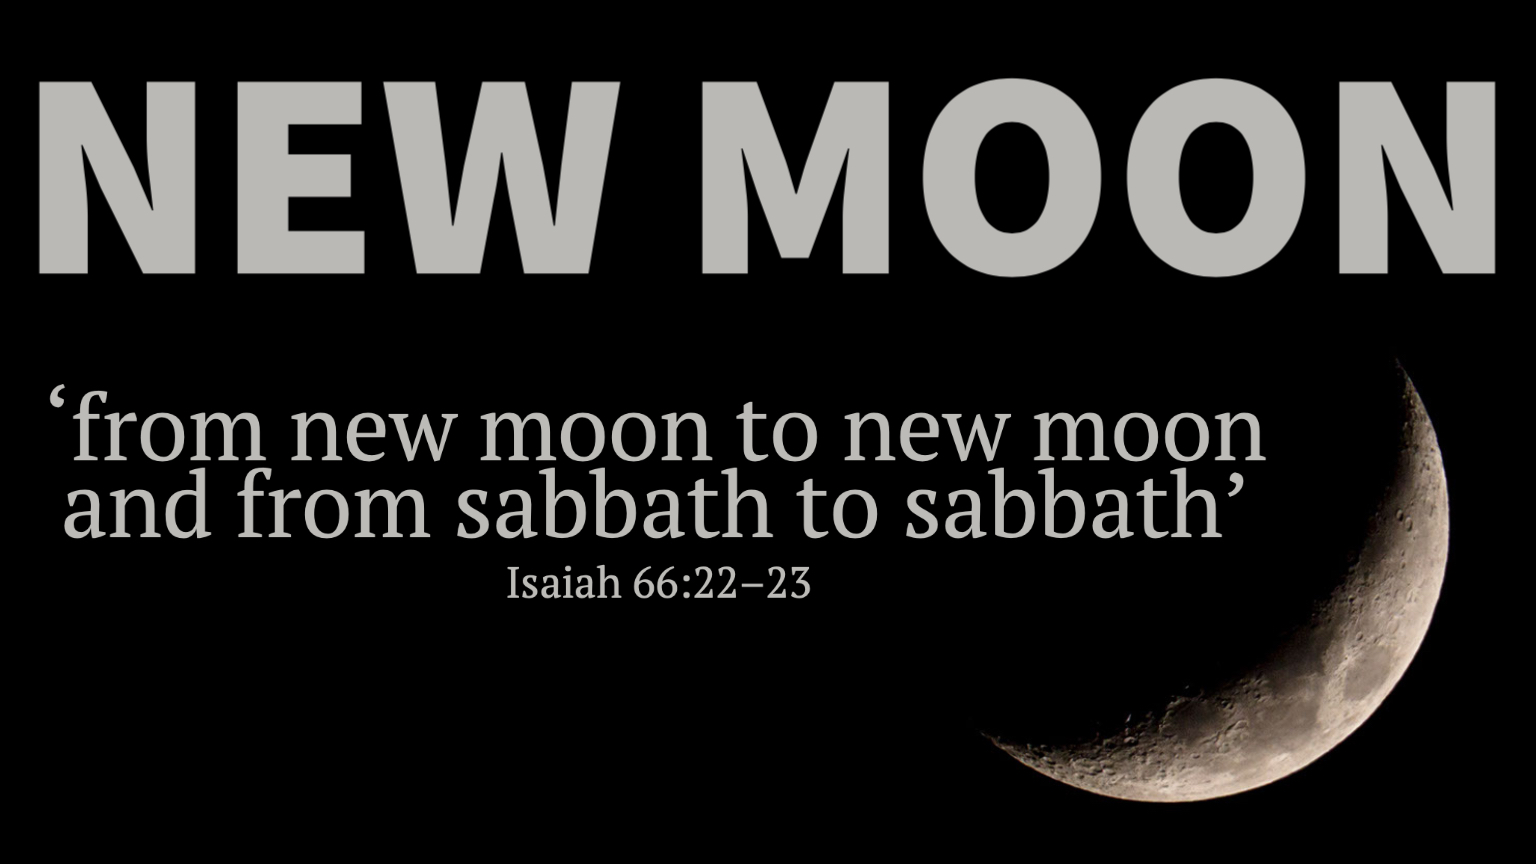 Rosh Chodesh (New Moon): 11th month online services